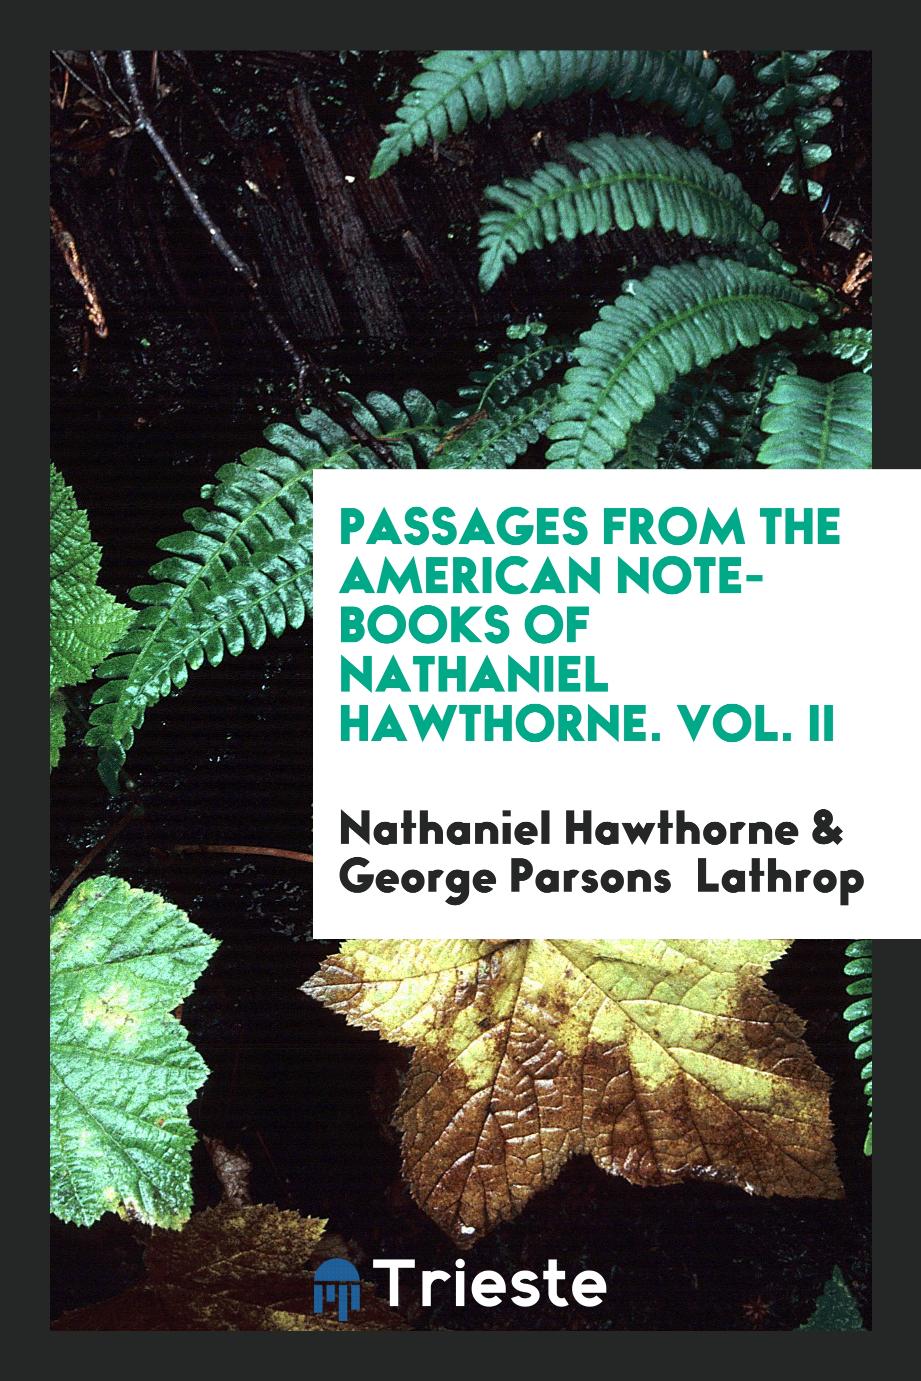 Passages from the American Note-books of Nathaniel Hawthorne. Vol. II